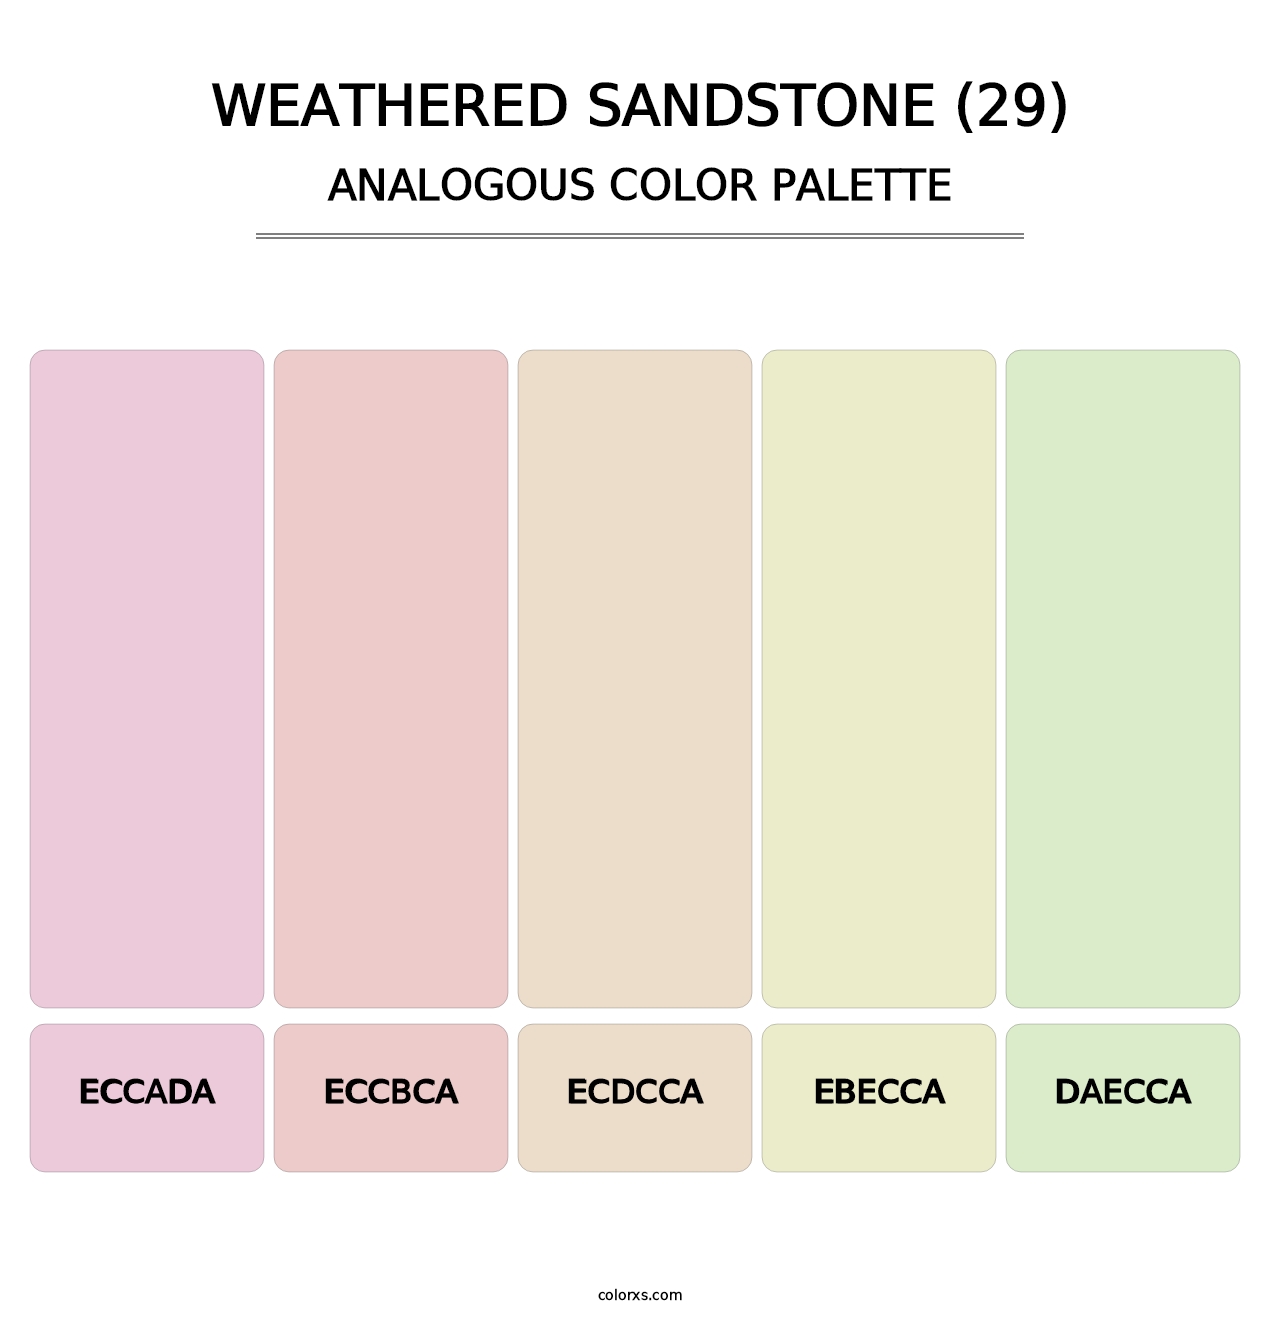 Weathered Sandstone (29) - Analogous Color Palette